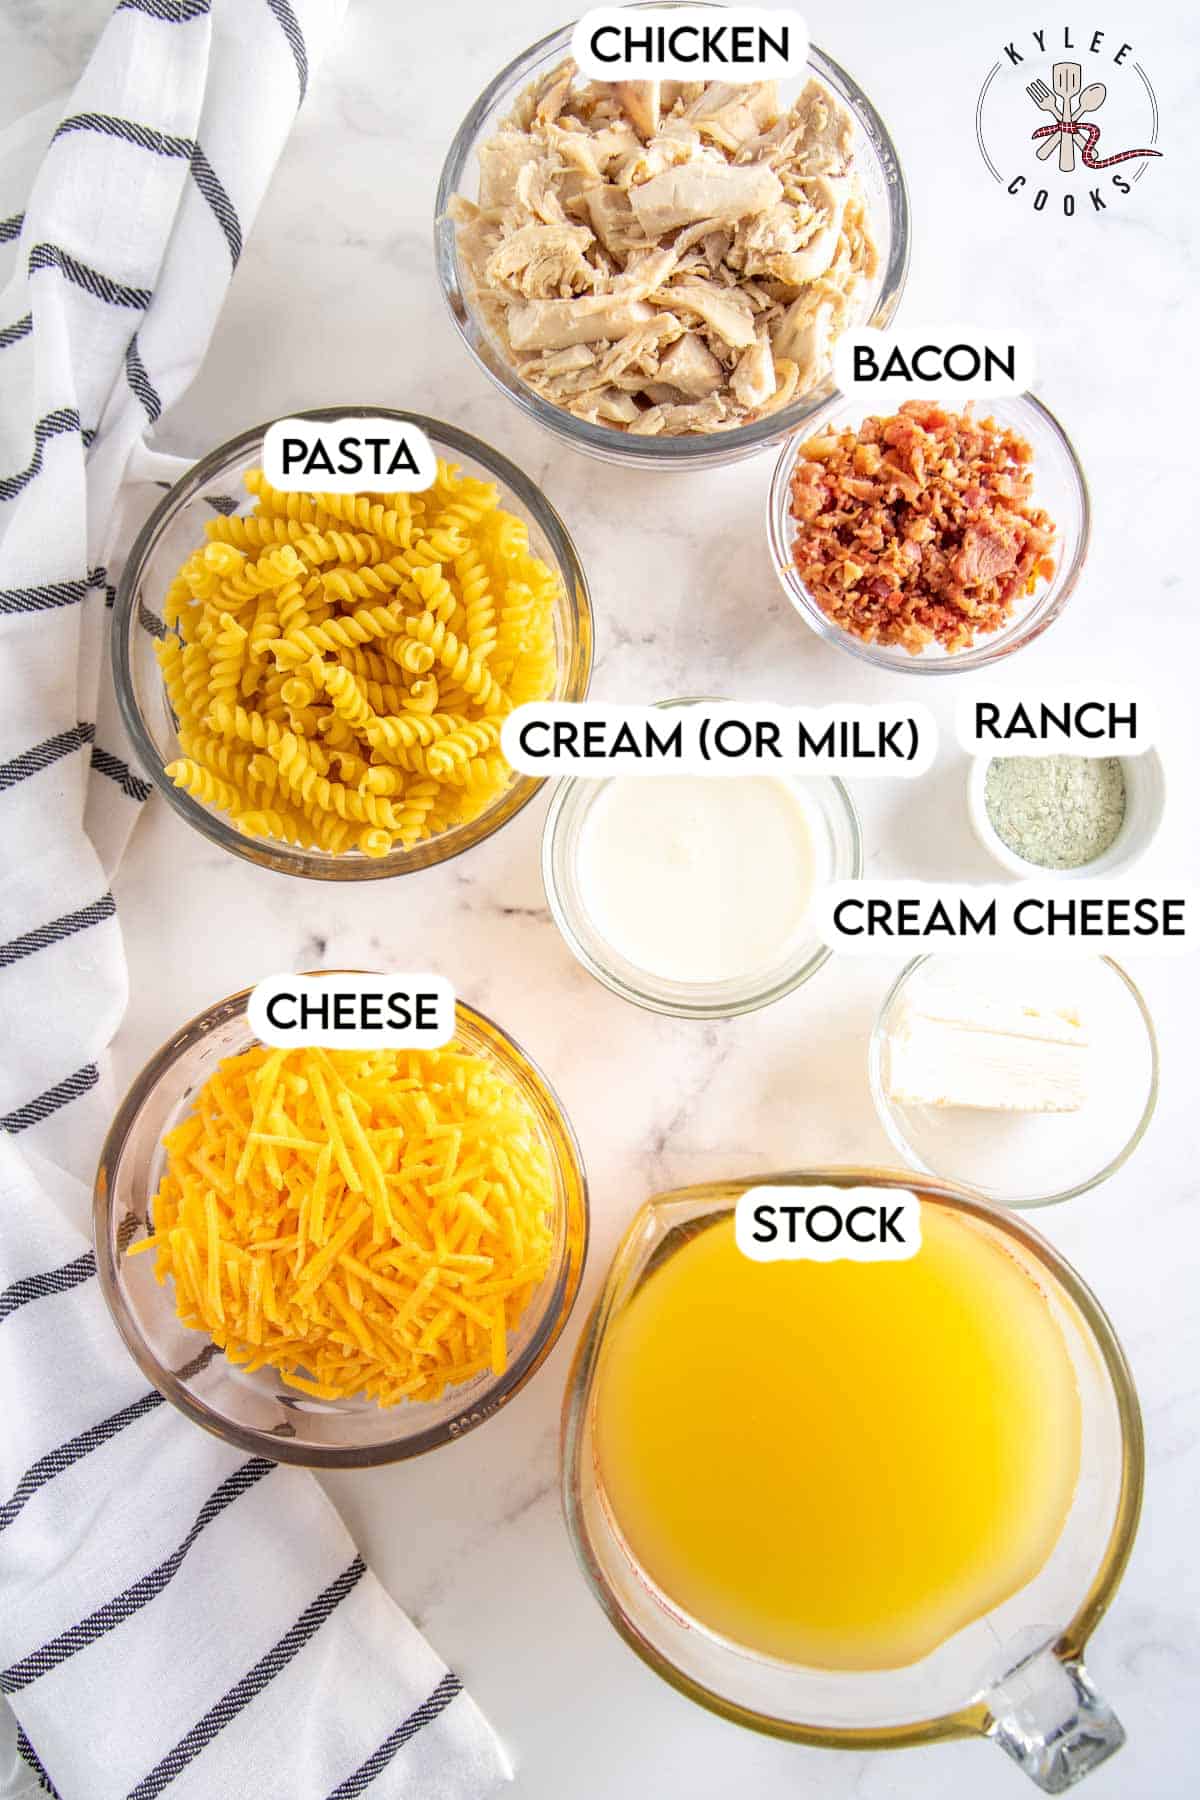 Ingredients to make Chicken Bacon Ranch Pasta laid out and labeled.